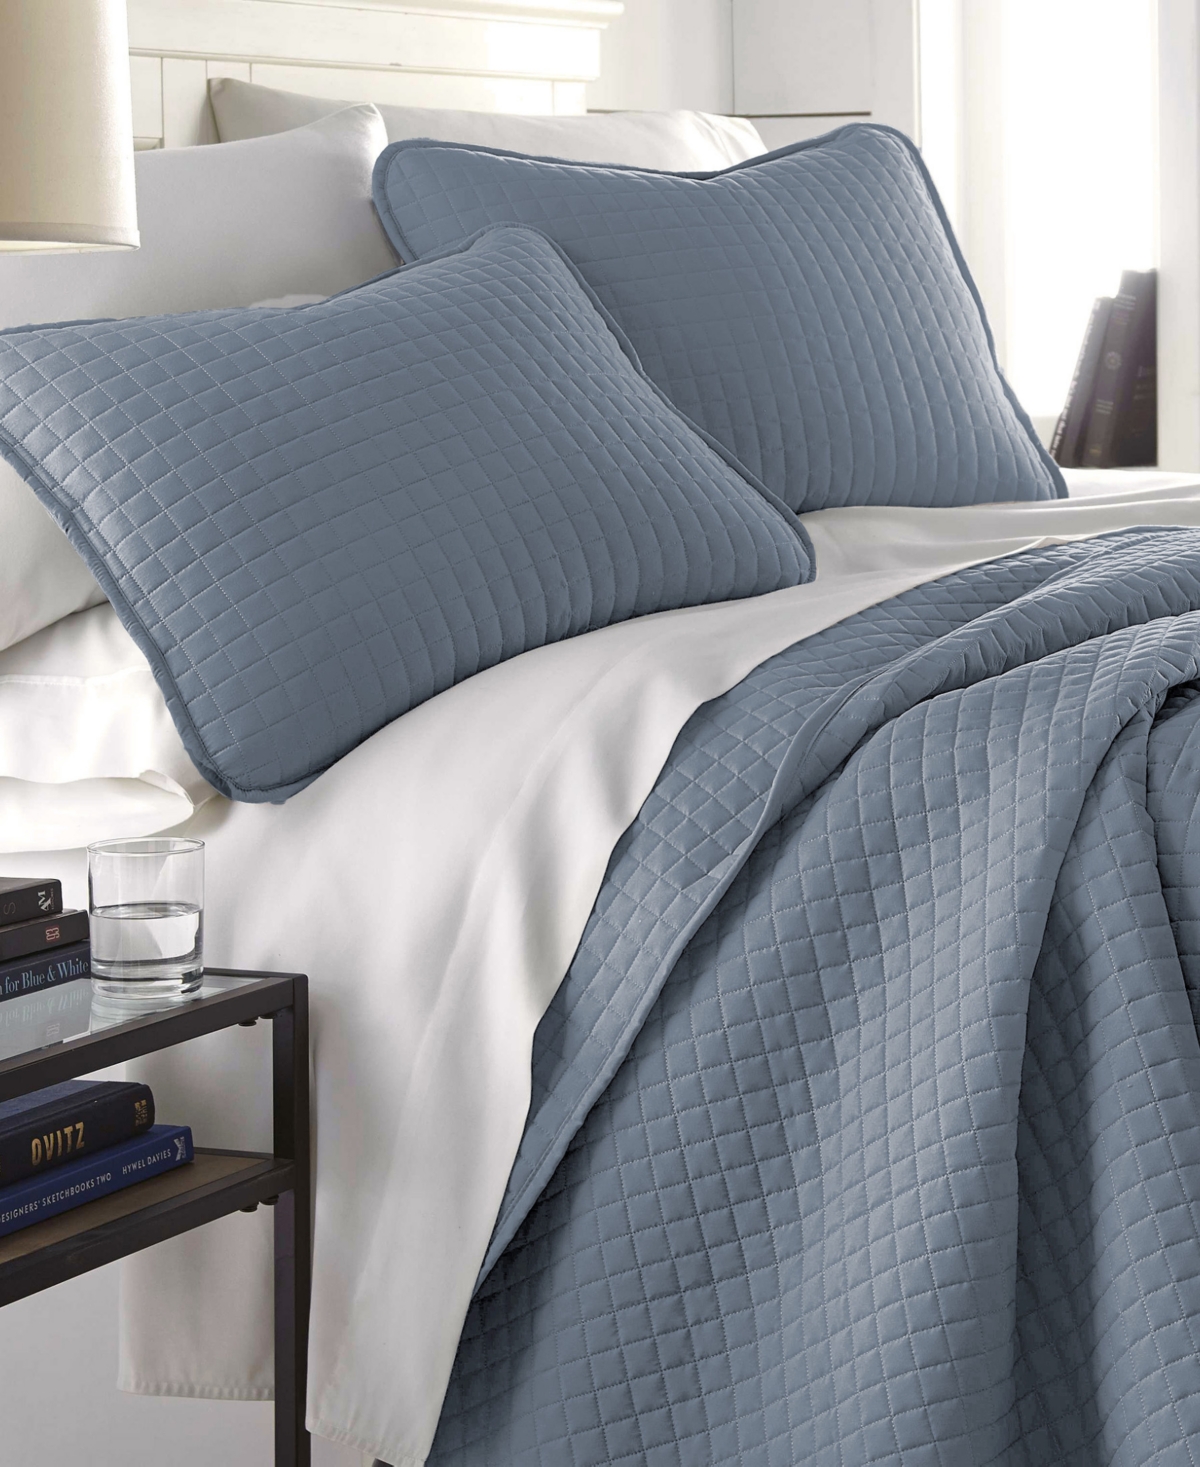 Southshore Fine Linens Oversized Lightweight Quilt And Sham Set, Twin In Slate Blue